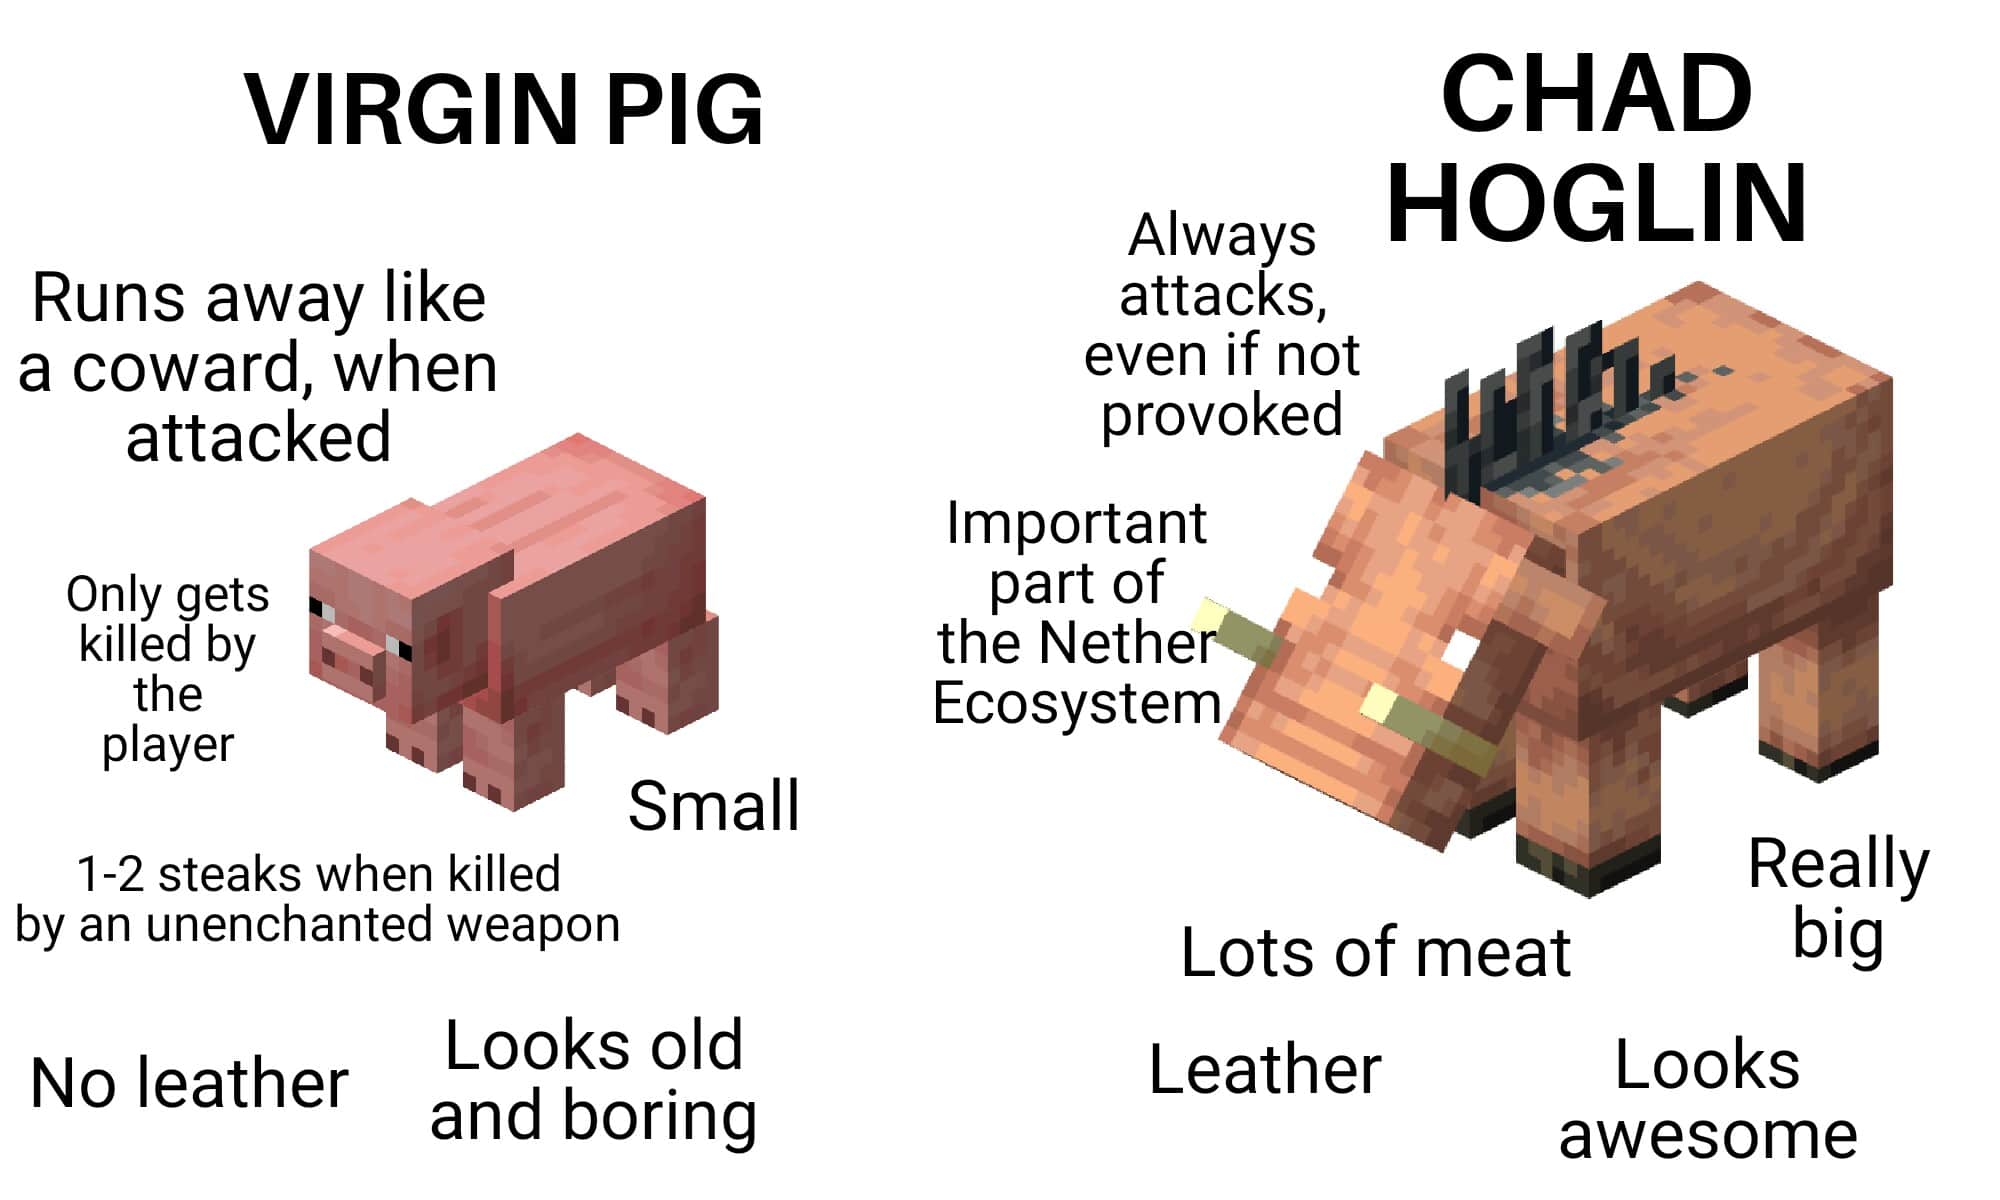 Minecraft, Hoglins minecraft memes Minecraft, Hoglins text: VIRGIN PIG Runs away like a coward, when attacked Only gets killed by the player Small 1-2 steaks when killed by an unenchanted weapon Looks old No leather and boring CHAD HOGLIN Always attacks, even if not provoked Important part of the Nethe Ecosystem Lots of meat Really big Leather Looks awesome 